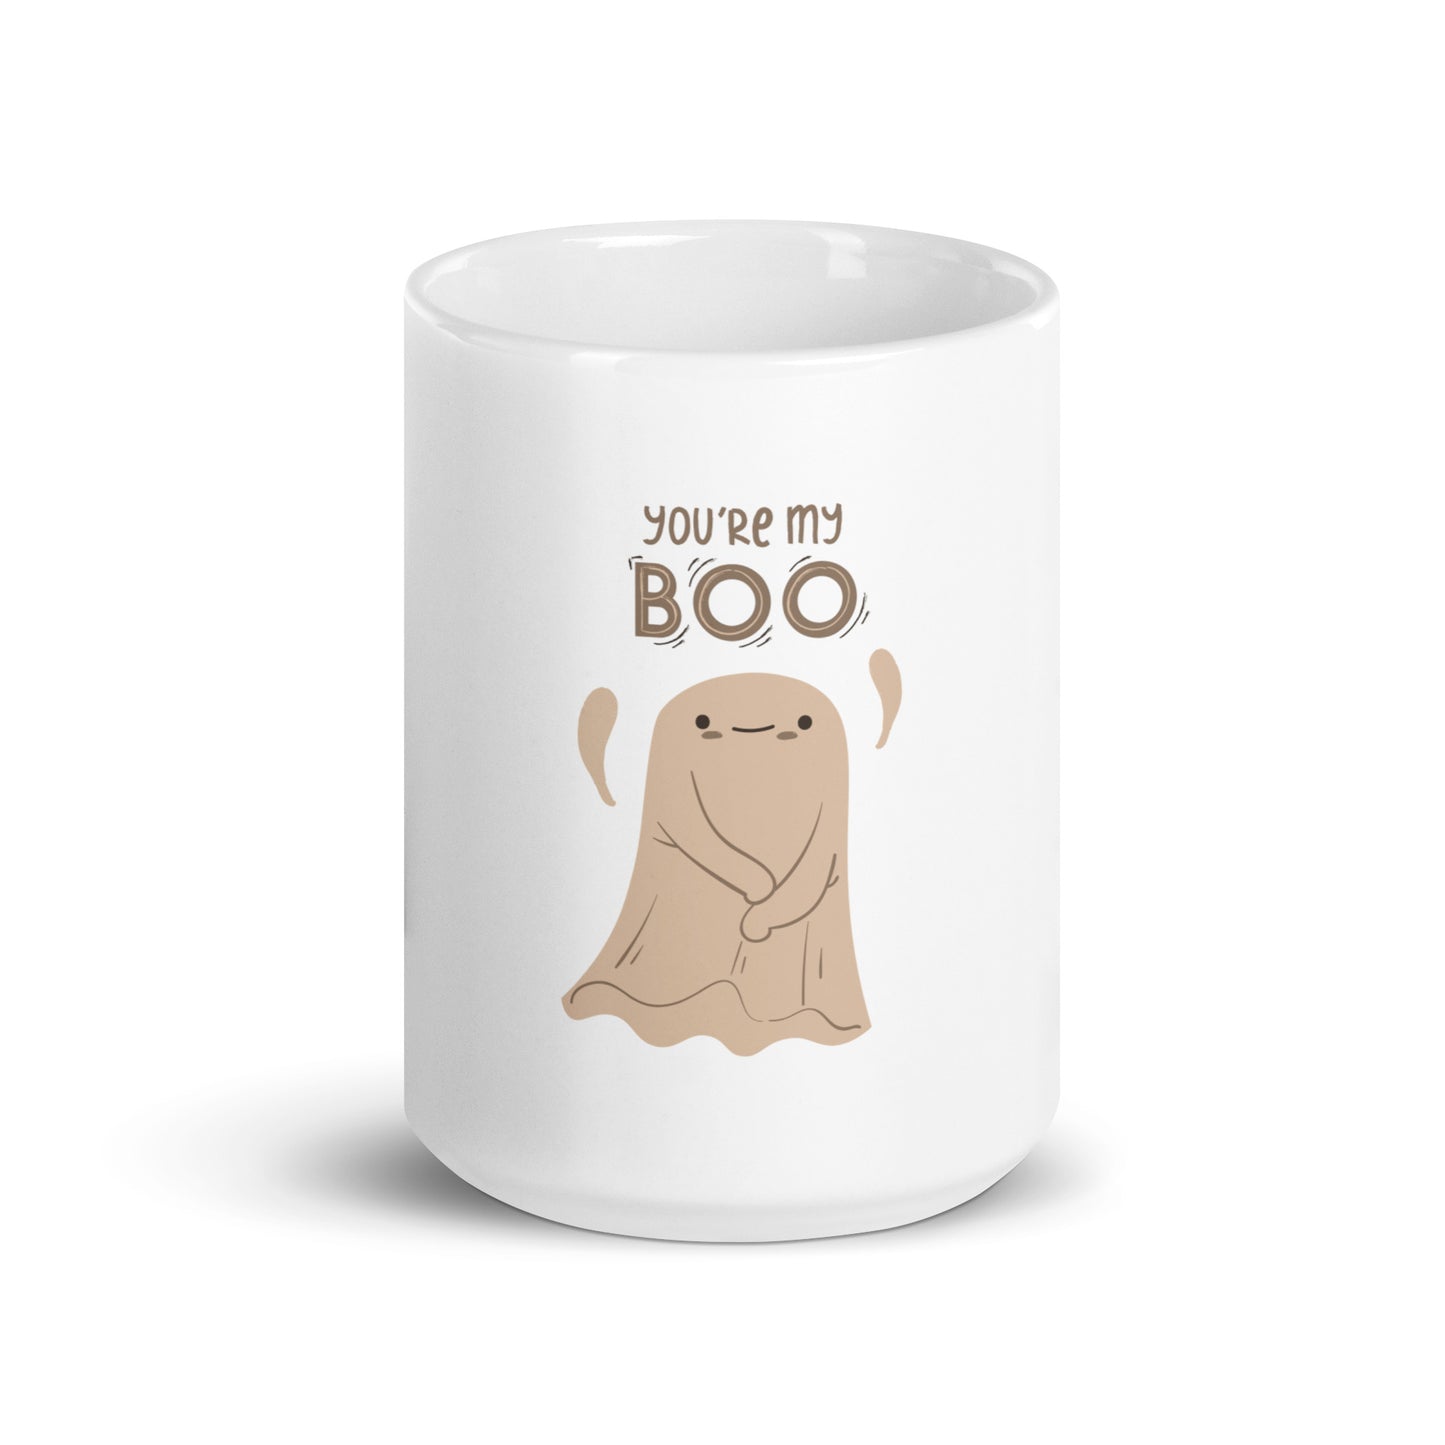 You Are My Boo - White Glossy Mug for Cozy Connections | Romantic Gift Idea